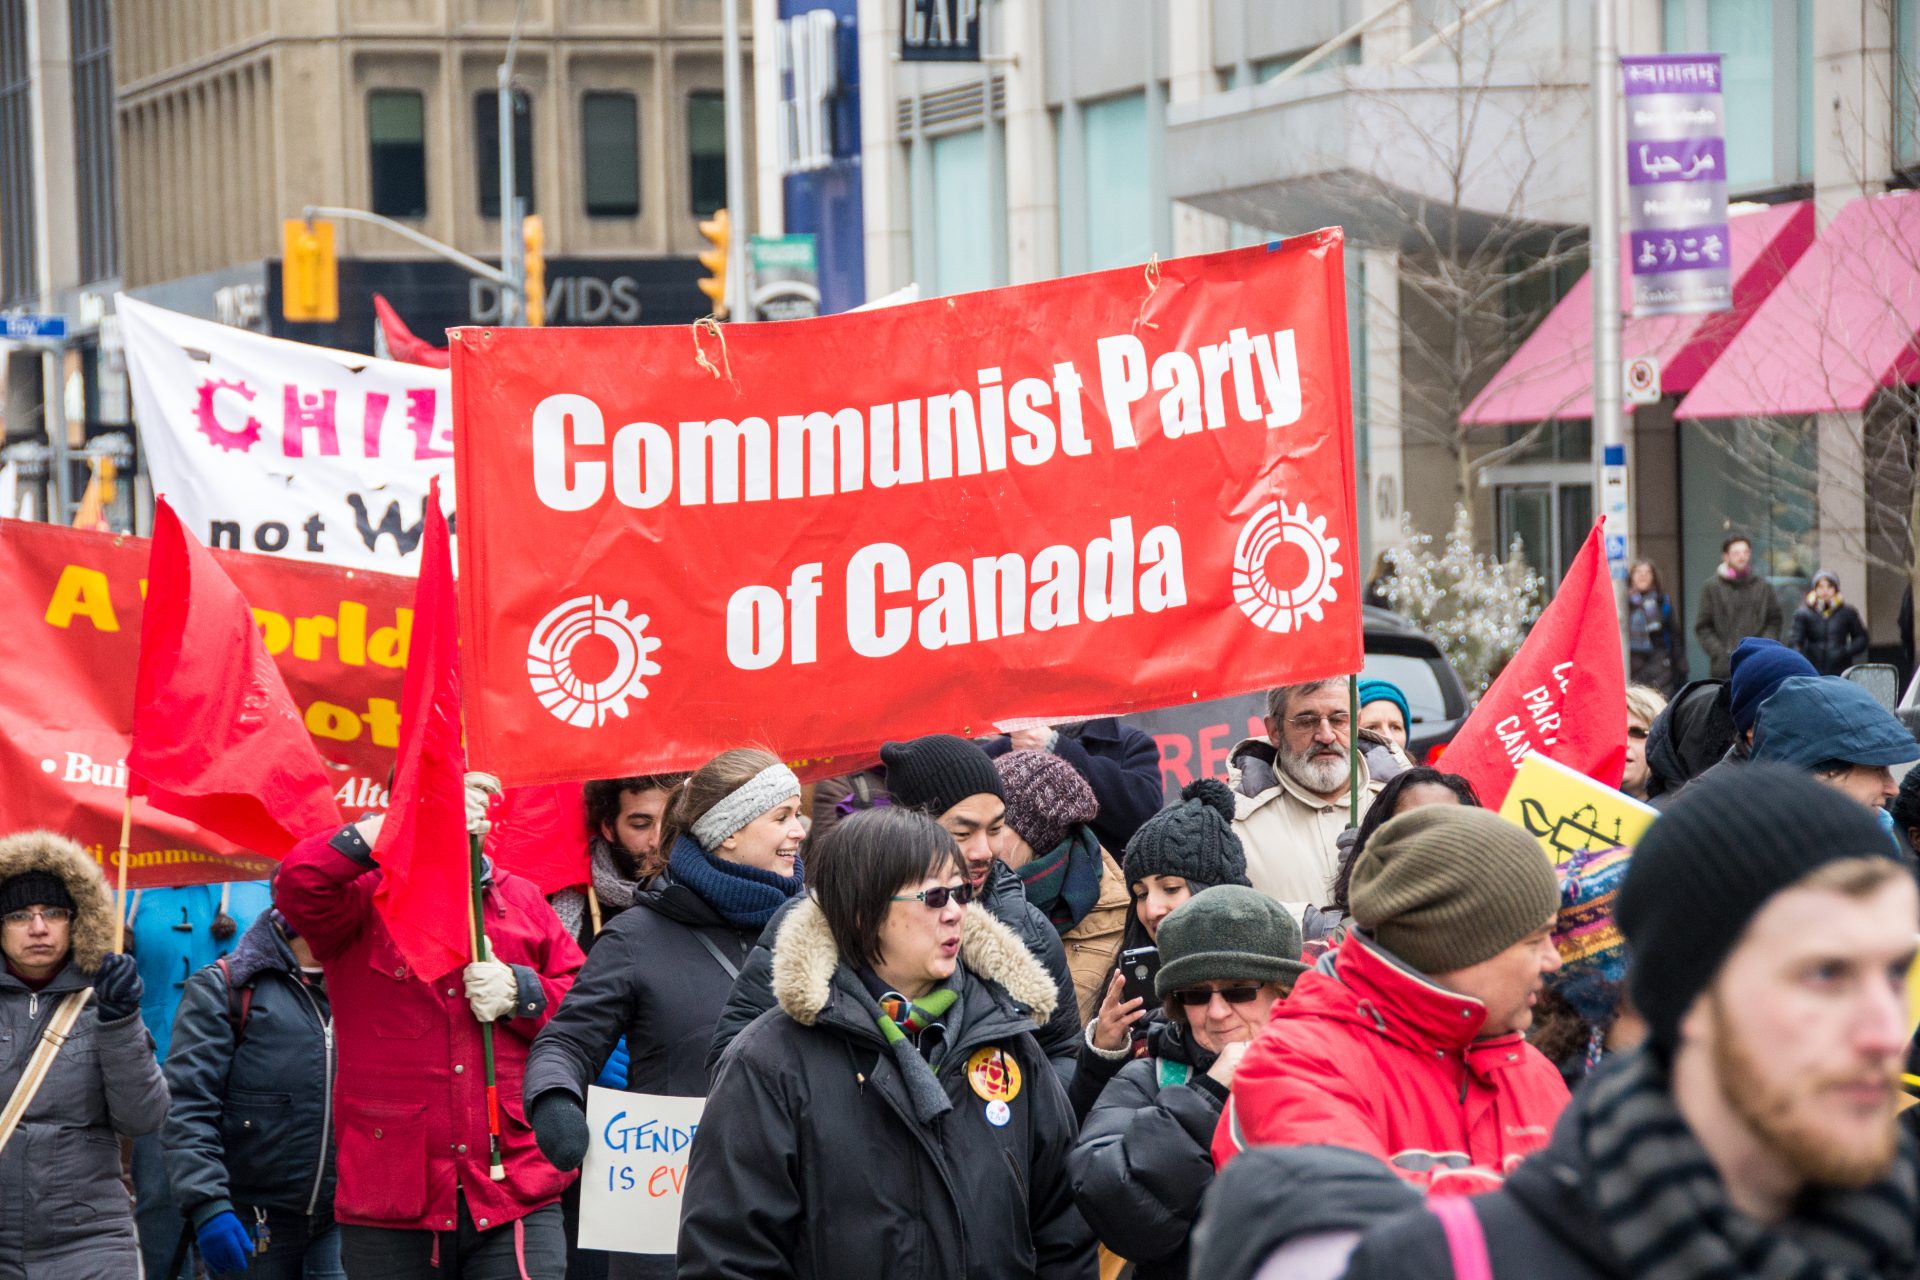 Support for socialism in Canada is strong, but no one wants to pay for it